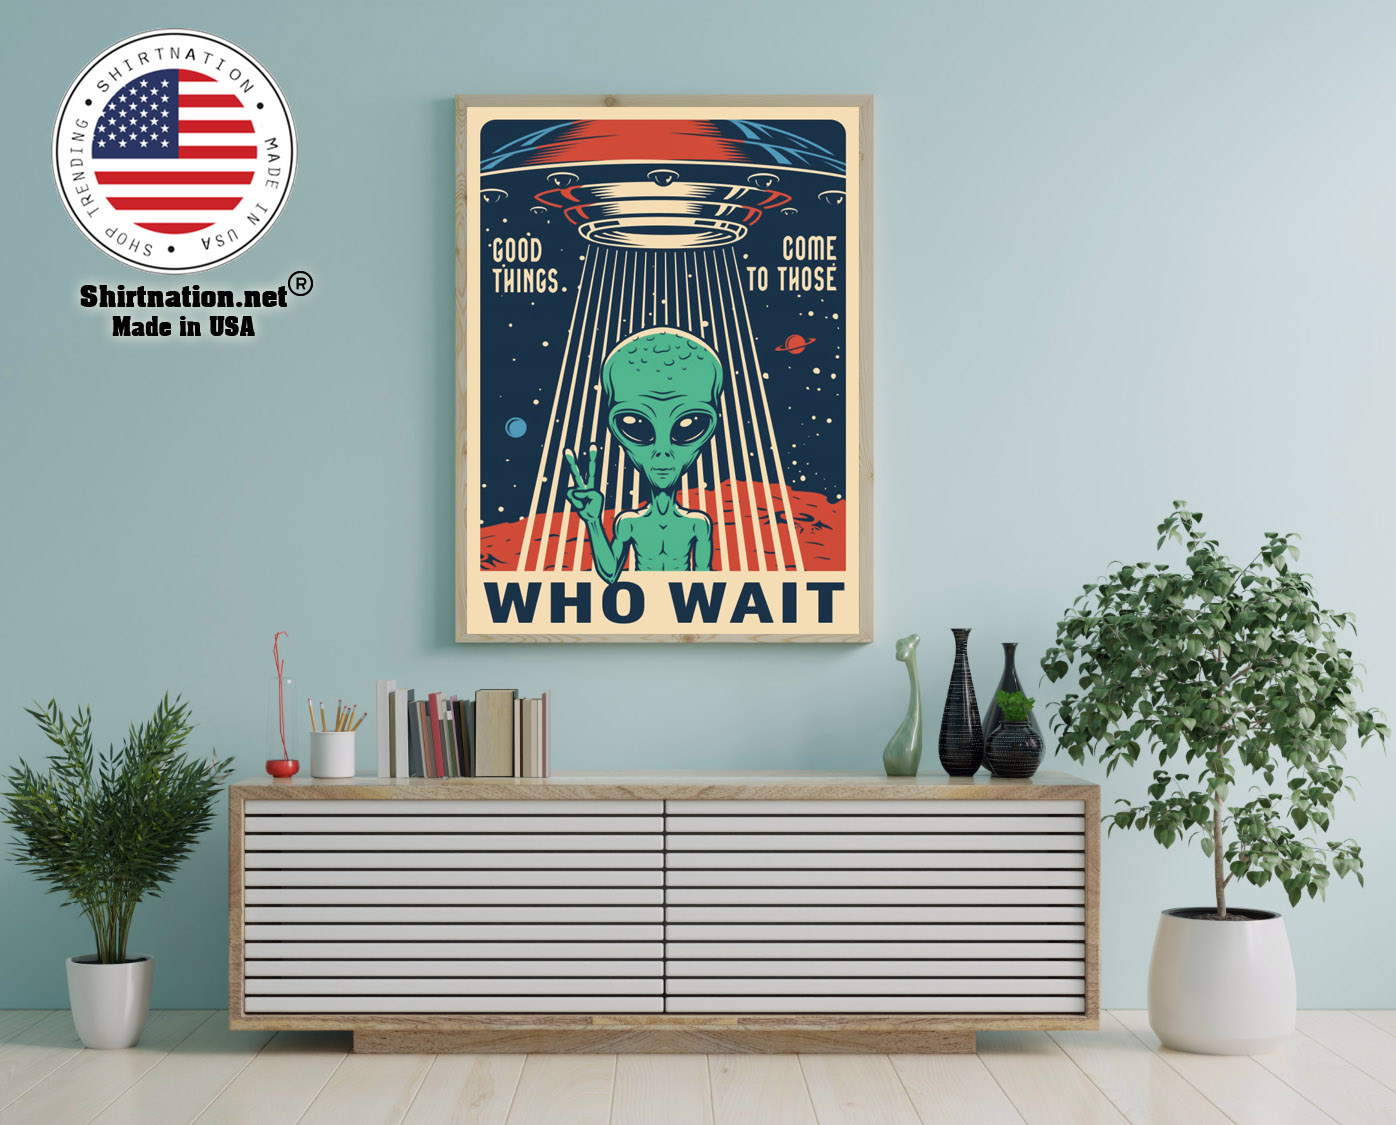 Alien Good things come to those who wait poster 14